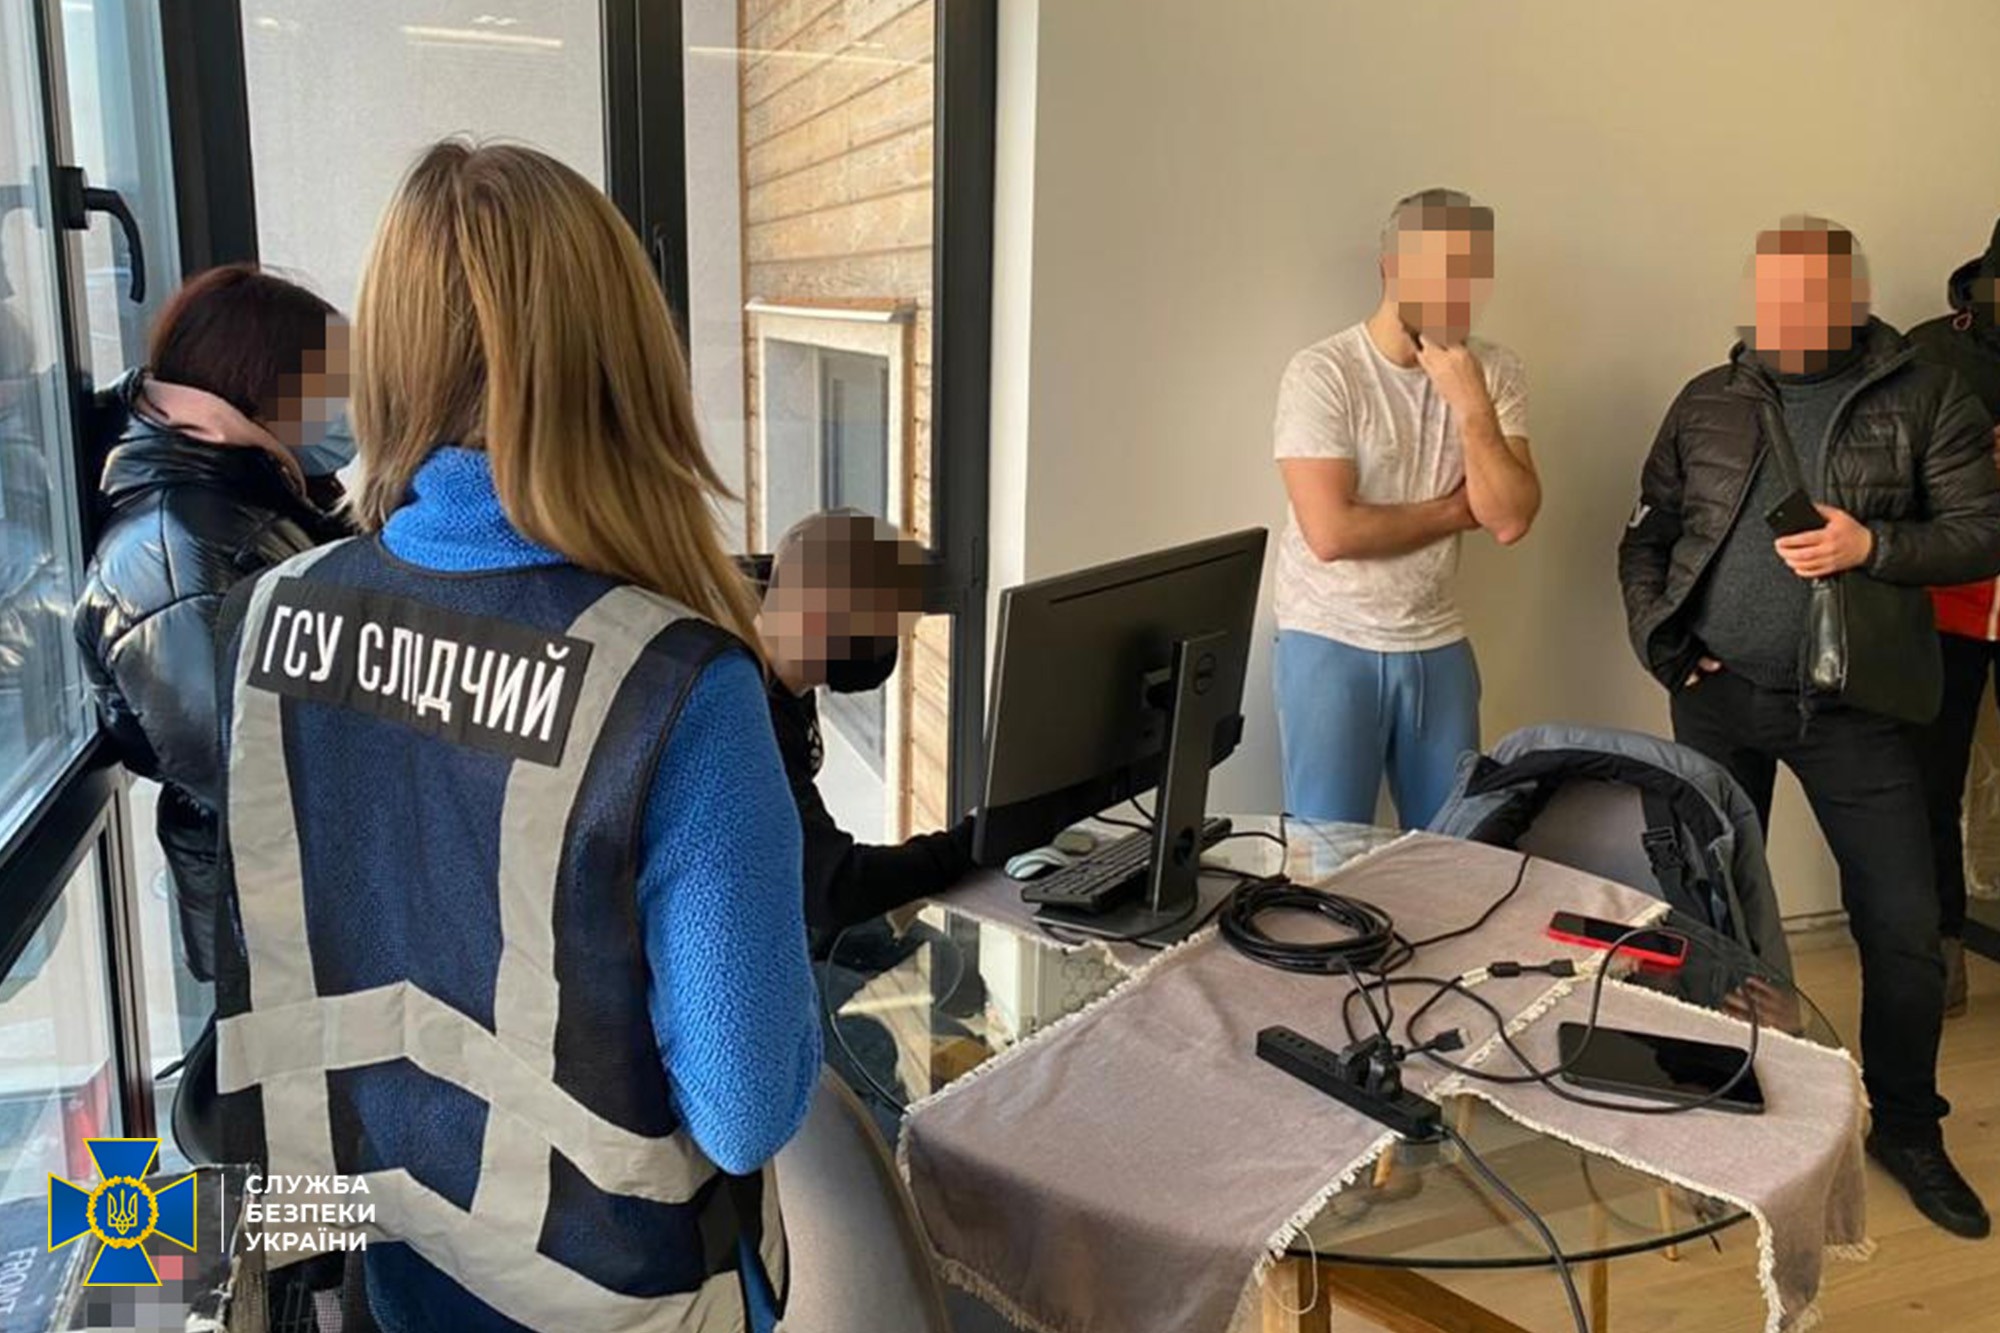 Ukrainian police arrested Ransomware gang behind attacks on 50 companies